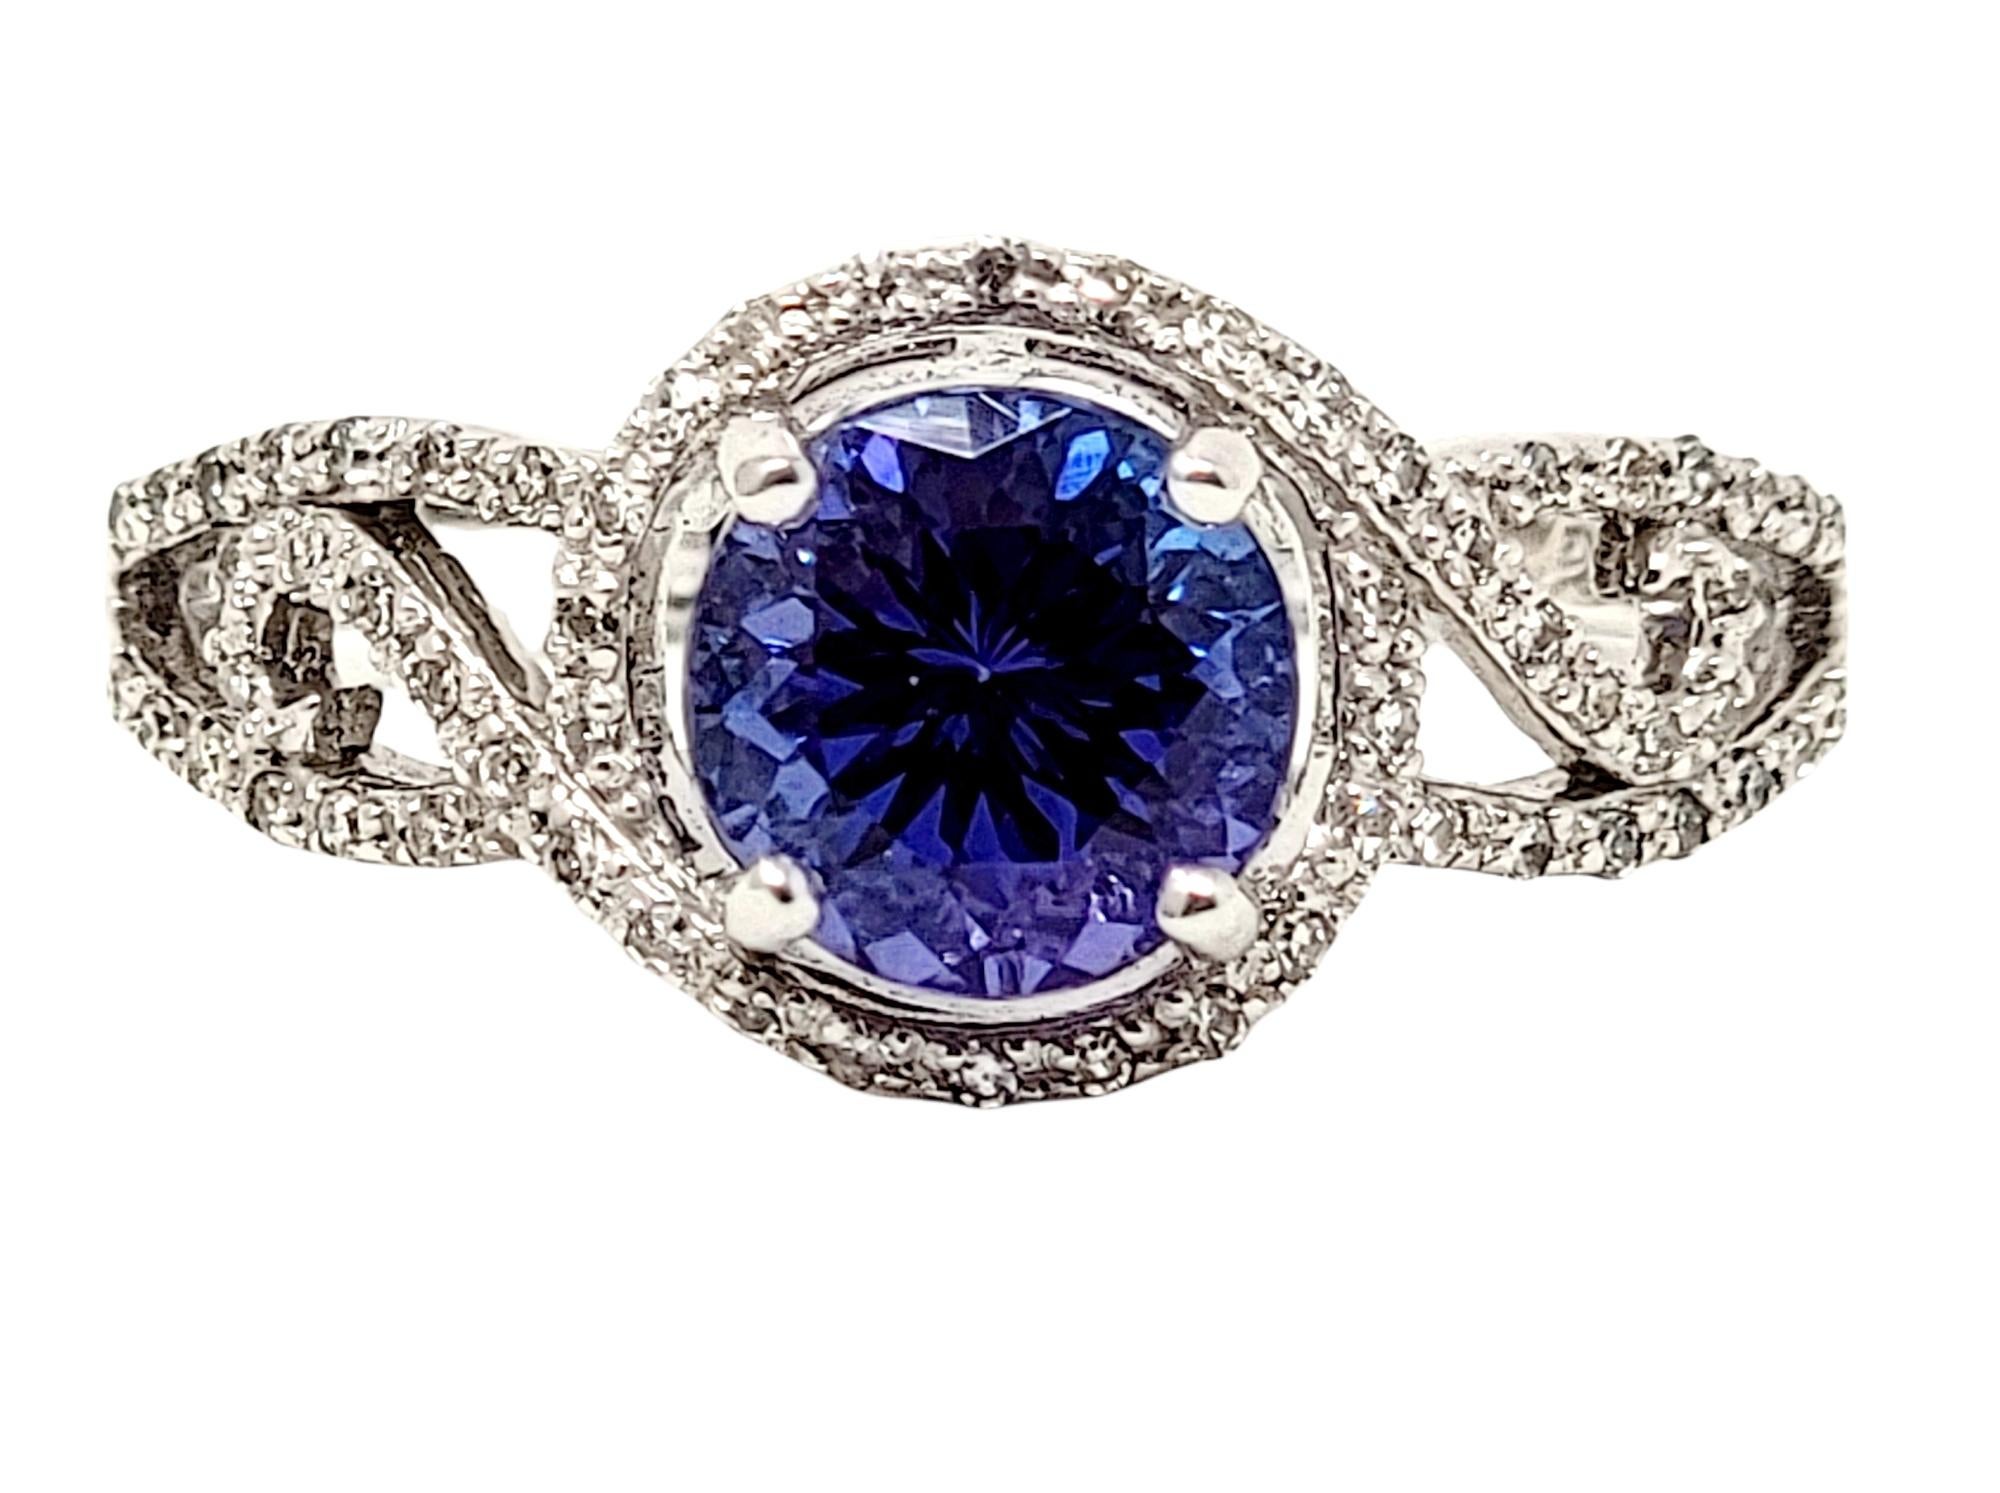 Ring size: 7

Absolutely gorgeous tanzanite and diamond halo ring with delicate swirl details. 

Ring size: 7
Metal: 18K White Gold
Weight: 3.73 grams
Height: 6.69 mm
Natural Tanzanite: 1.32 ctw
Sapphire cut: Round Mixed
Natural Diamonds: .16 ctw